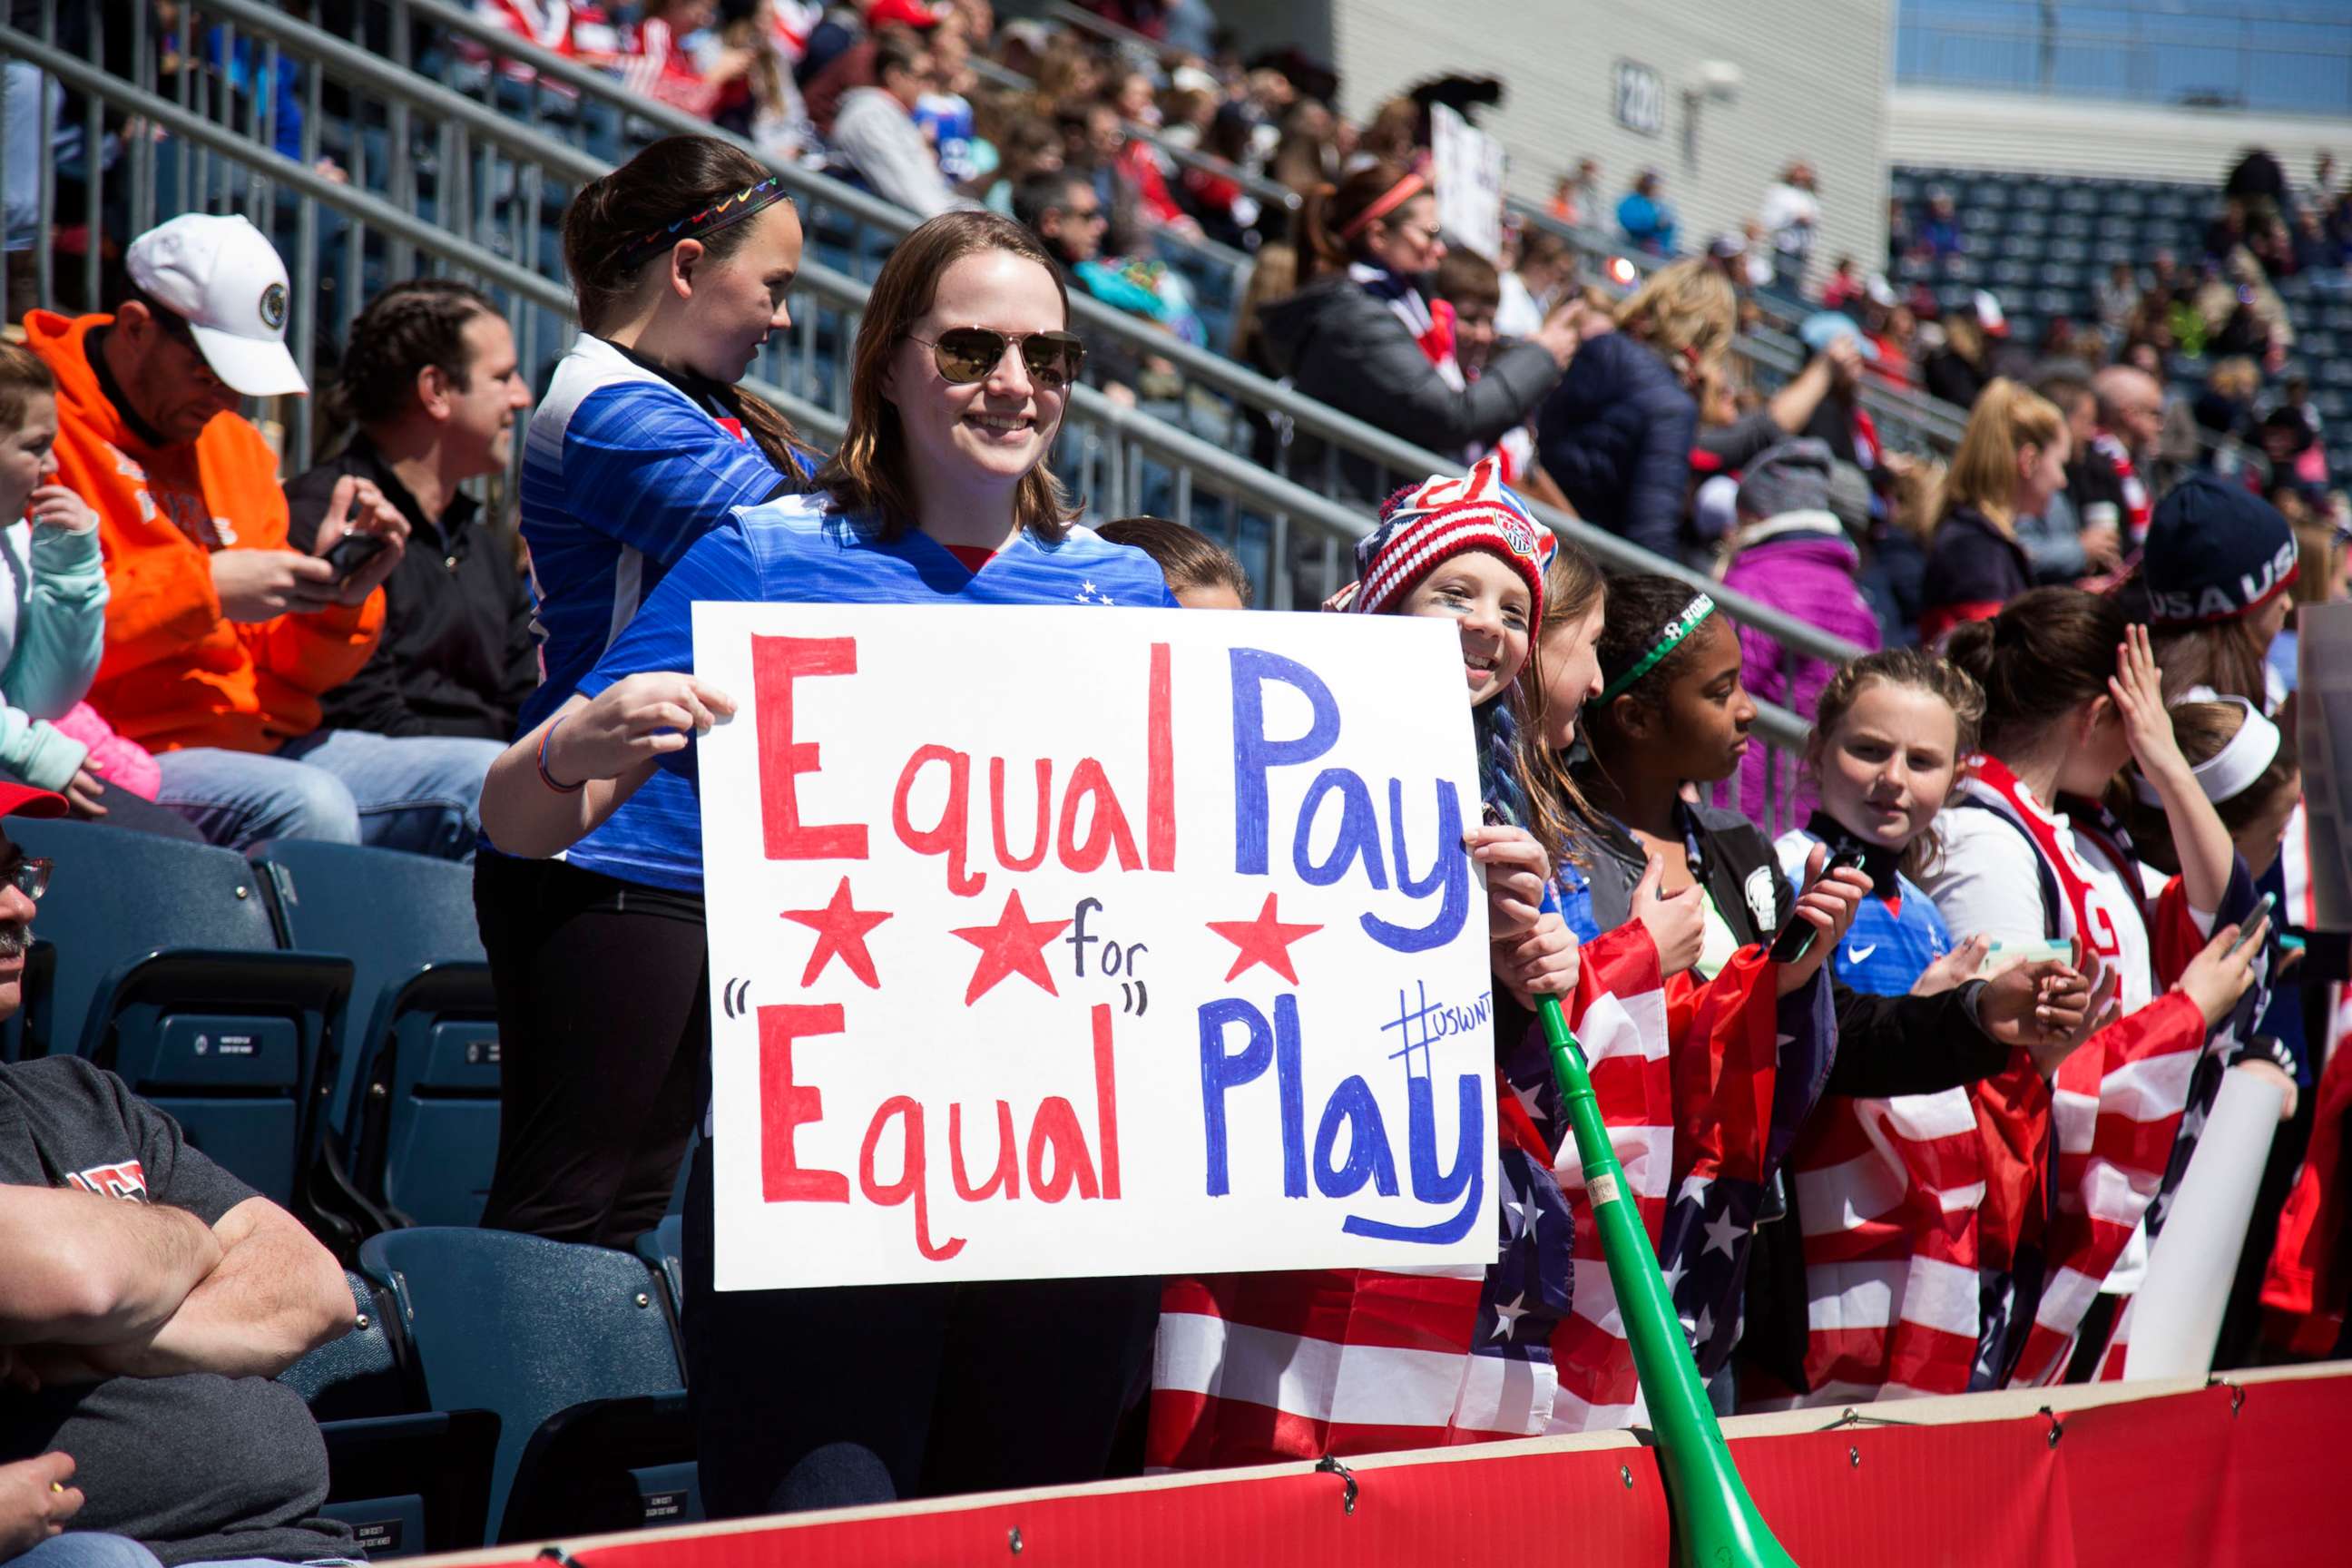 PHOTO: A fan of the United States holds a sign that reads, "Equal pay for equal play" during the game against Colombia at Talen Energy Stadium, April 10, 2016, in Chester, Penn.